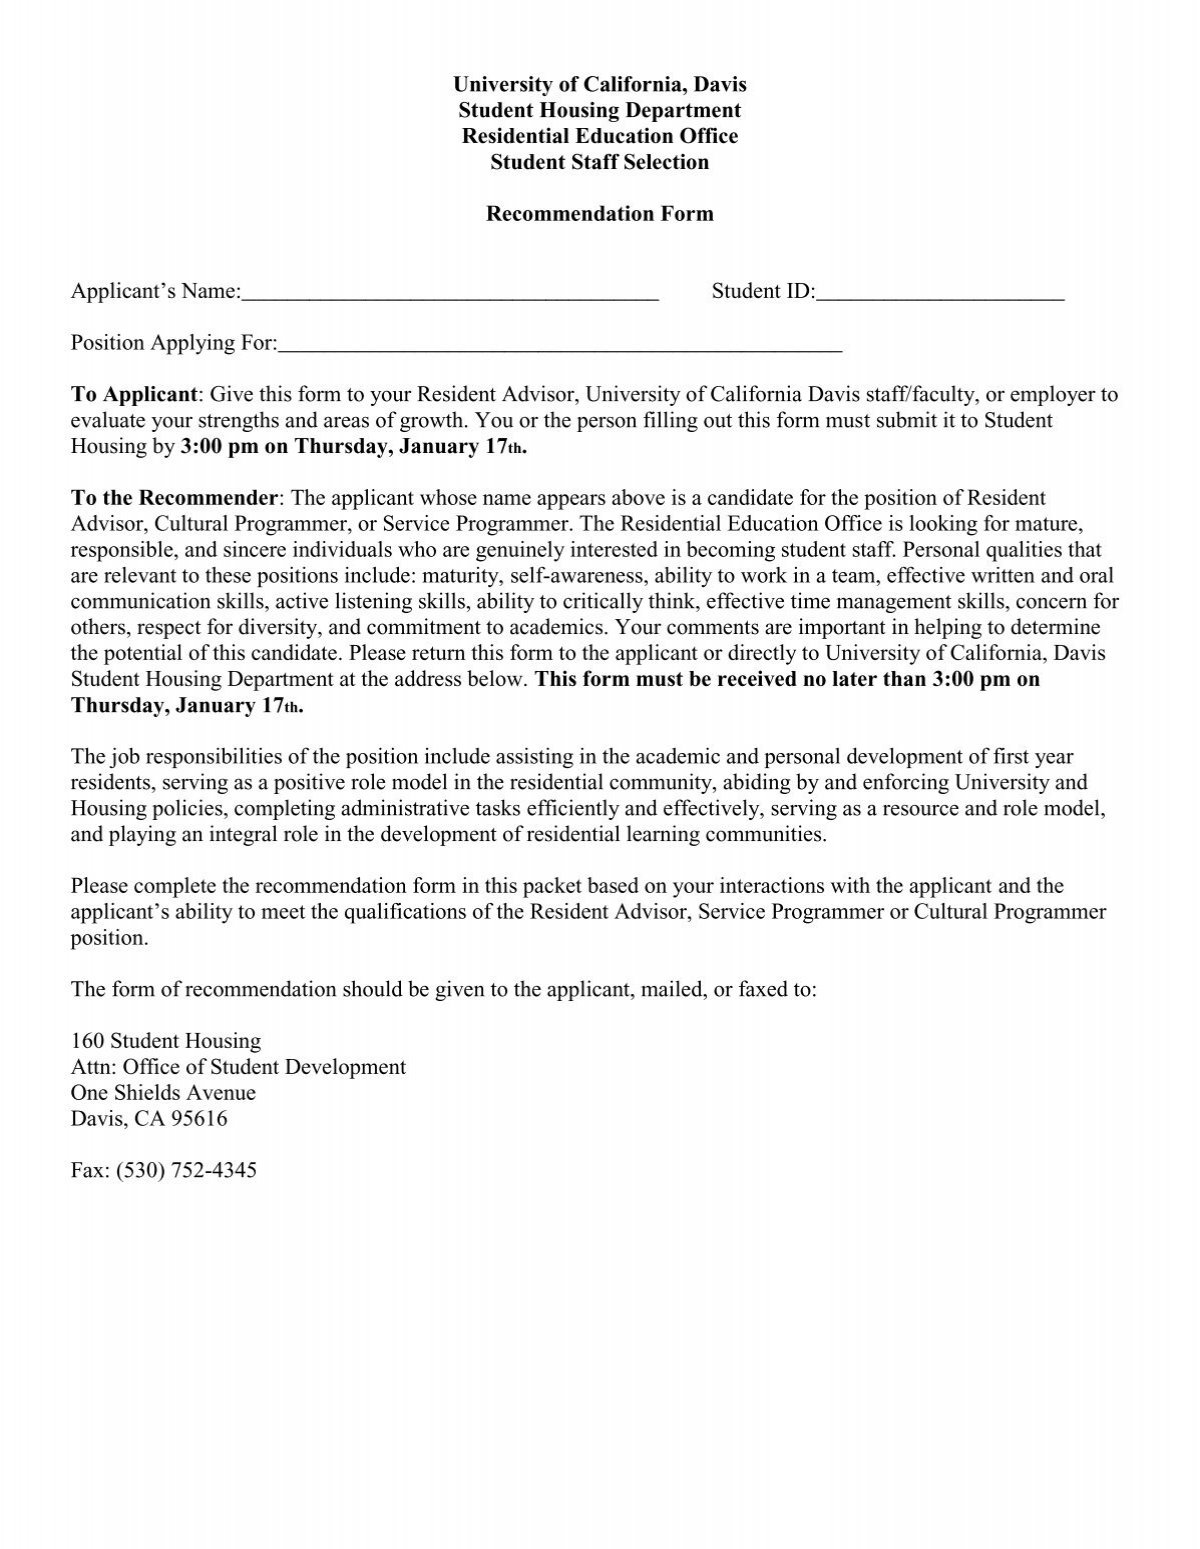 letter-of-recommendation-form-uc-davis-student-housing